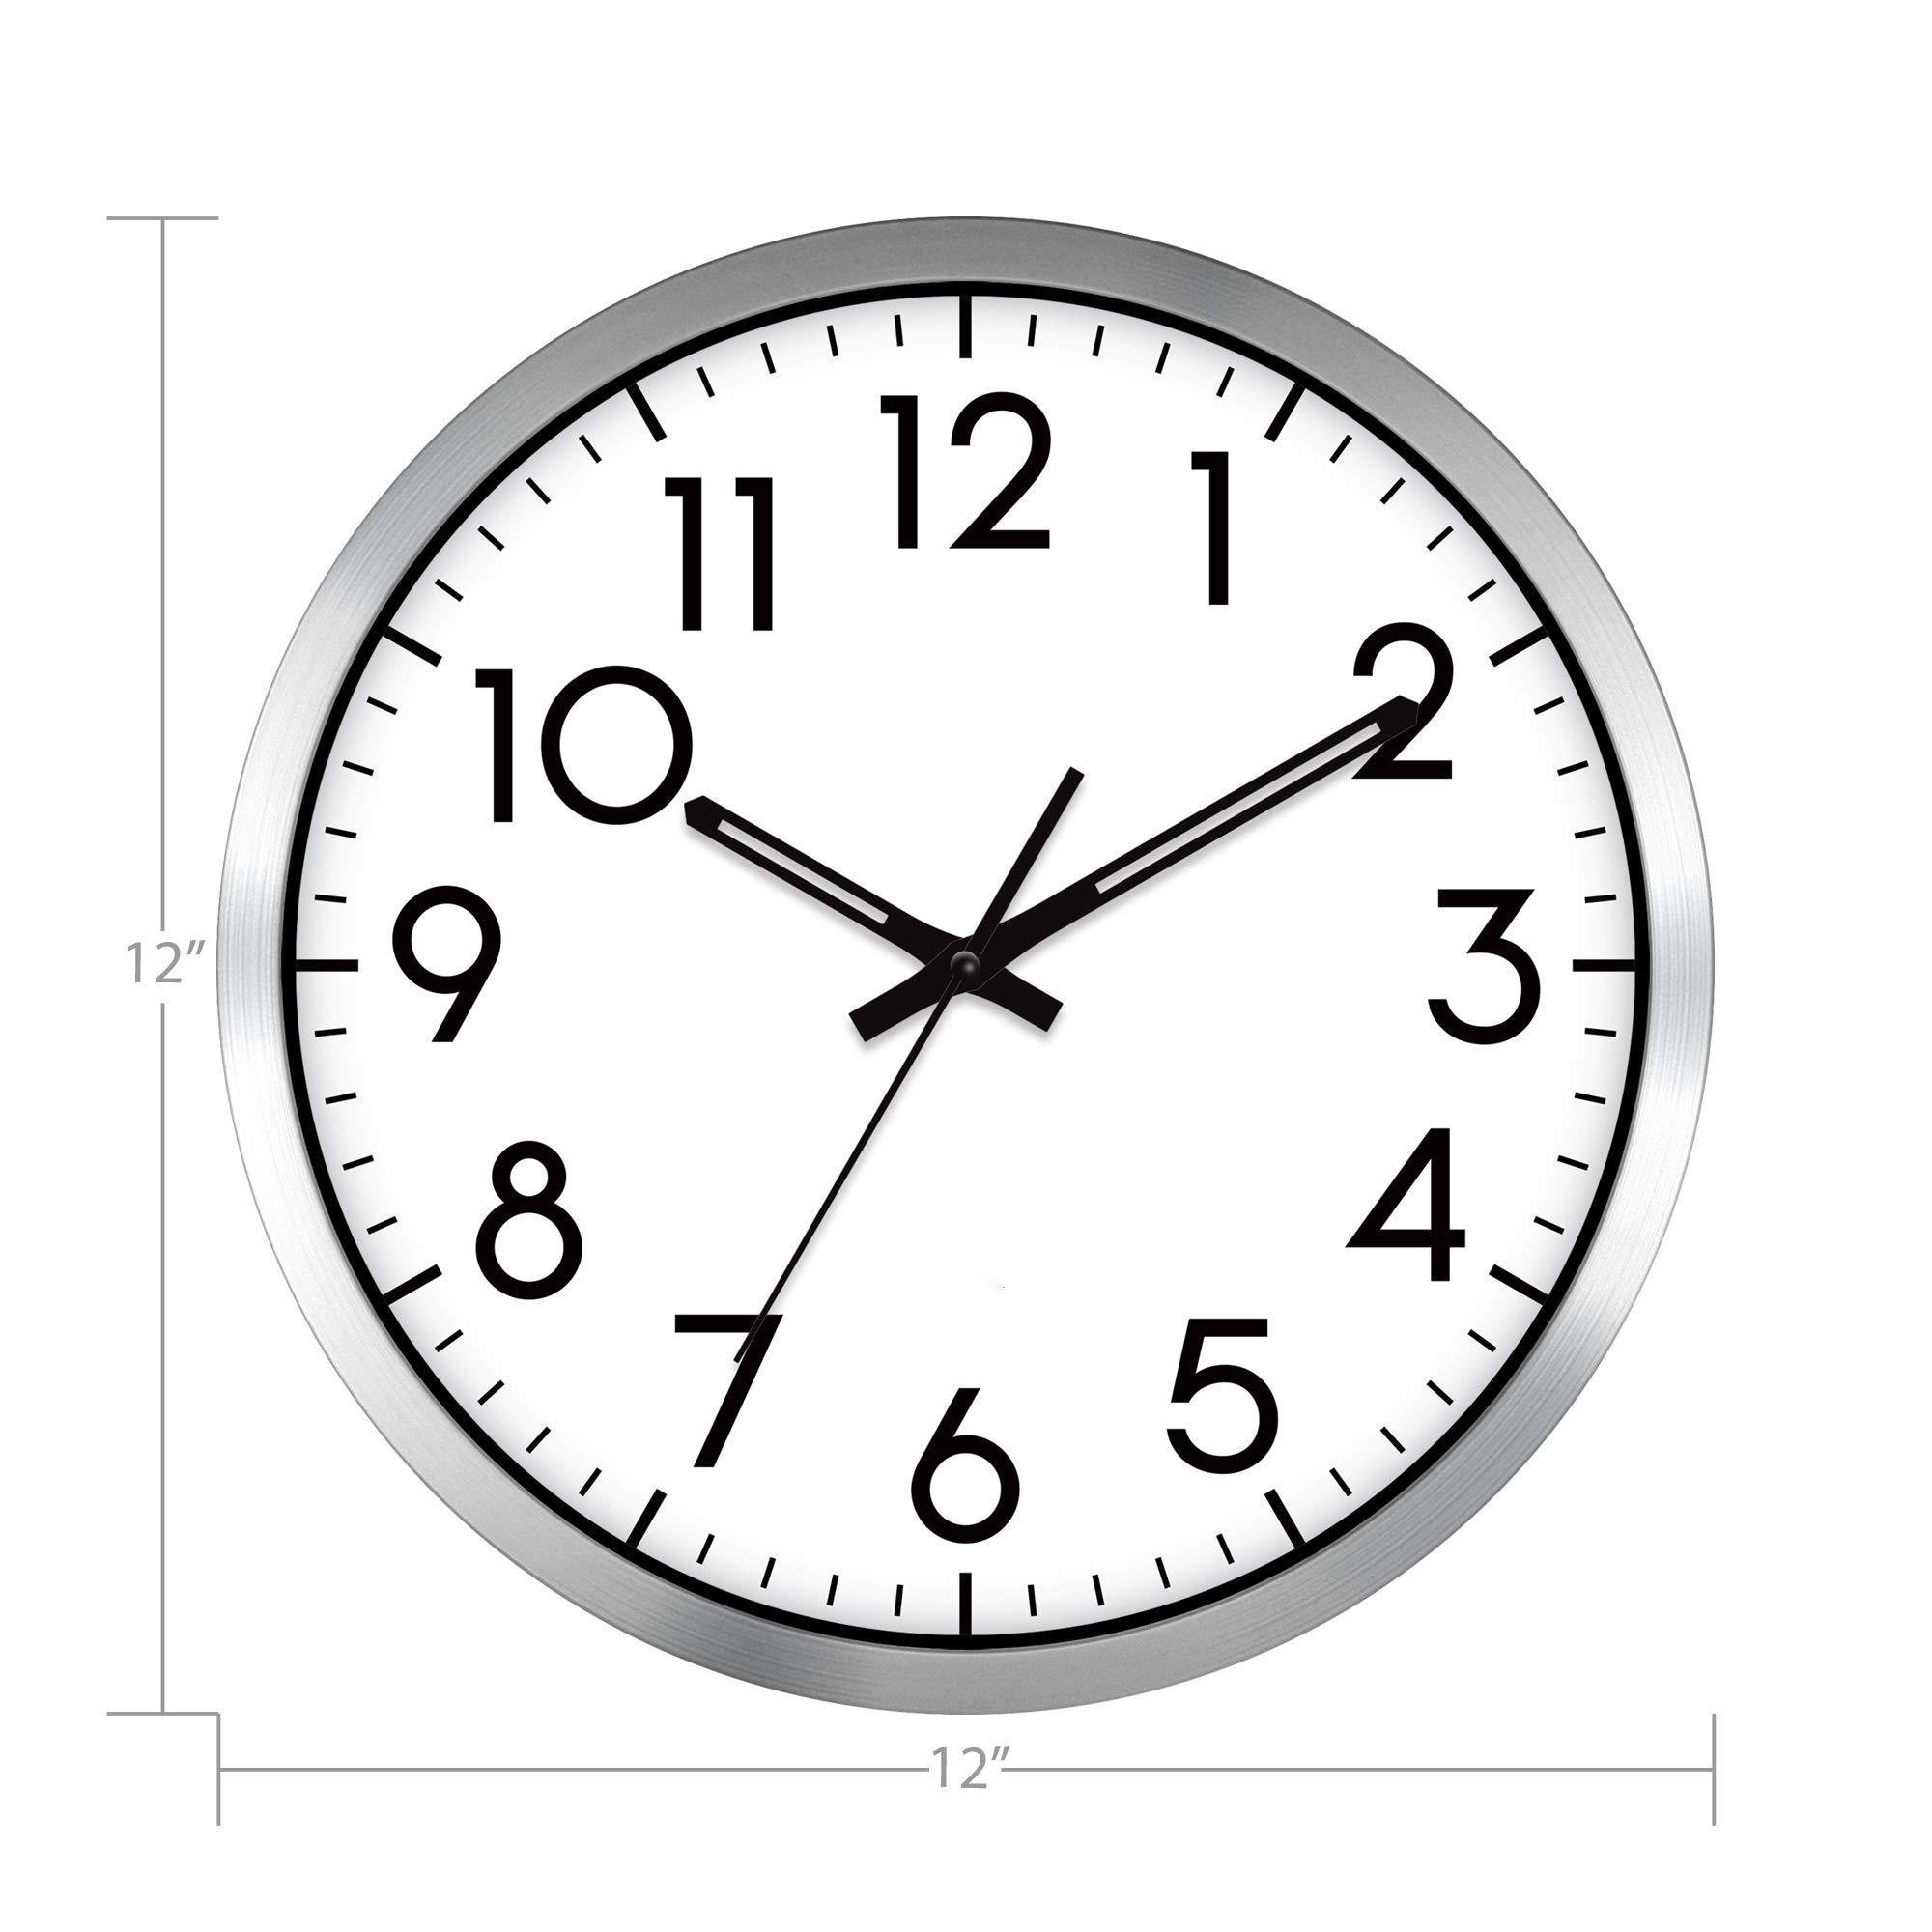 How to draw a Wall Clock Real Easy - YouTube